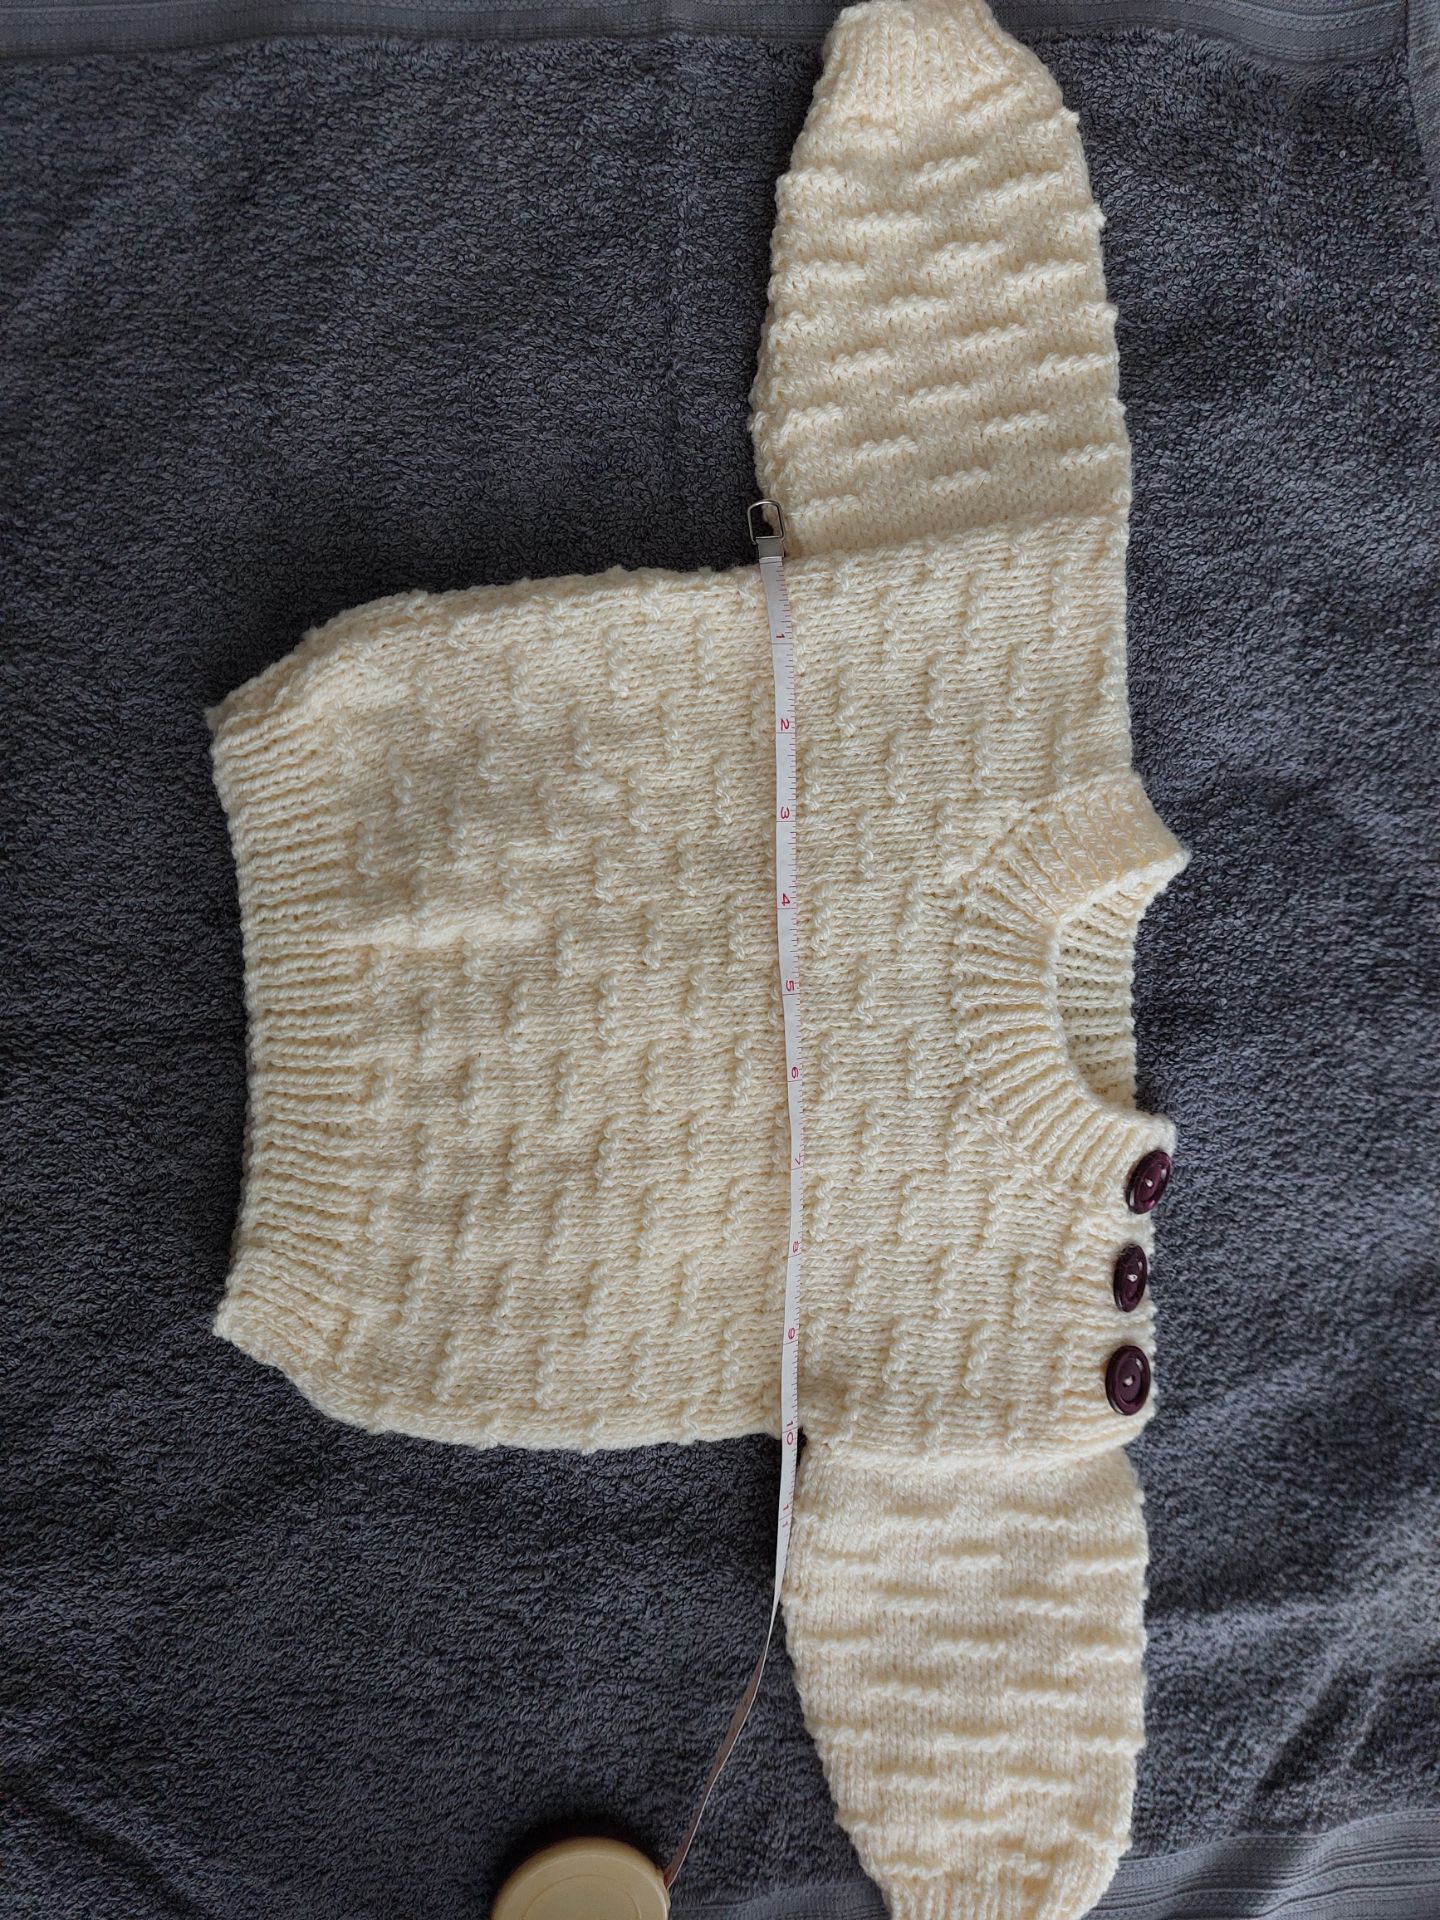 Hand Knitted Baby Jumper - Image 3 of 4